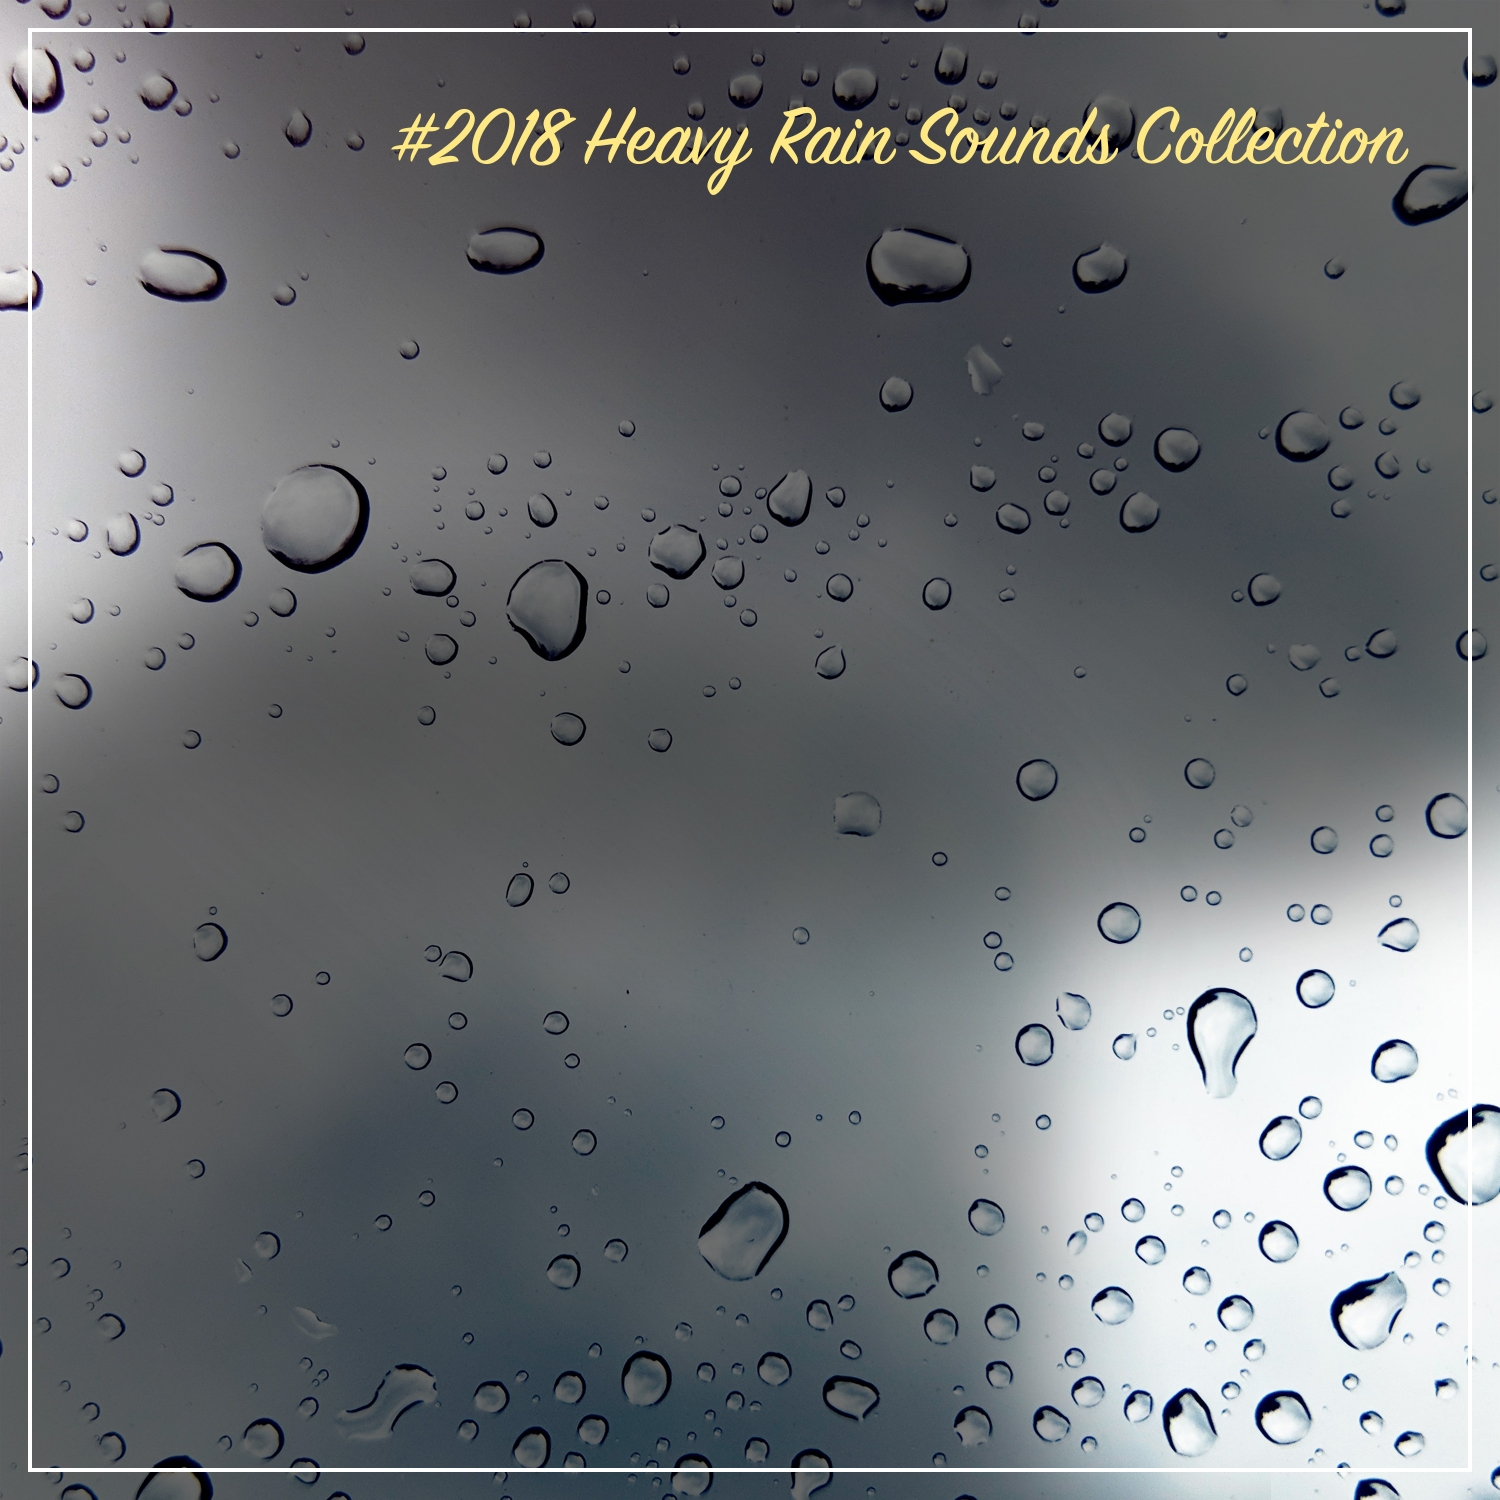 #2018 Heavy Rain Sounds Collection with Thunder and Lightning